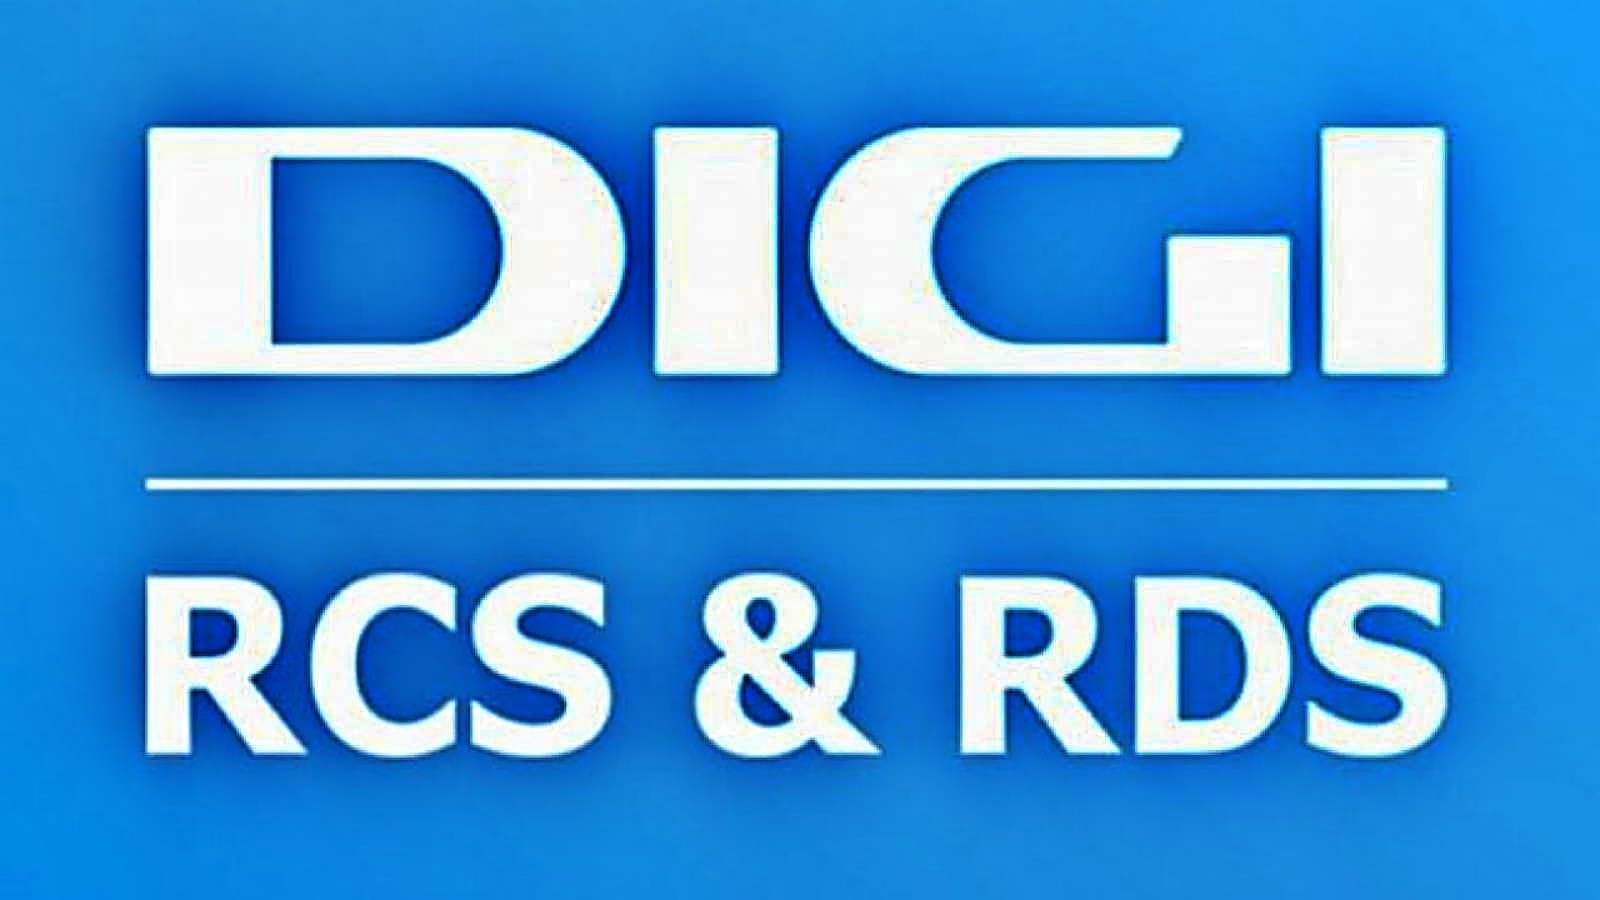 RCS & RDS IMPORTANT Official Announcement Good News Romanian Customers